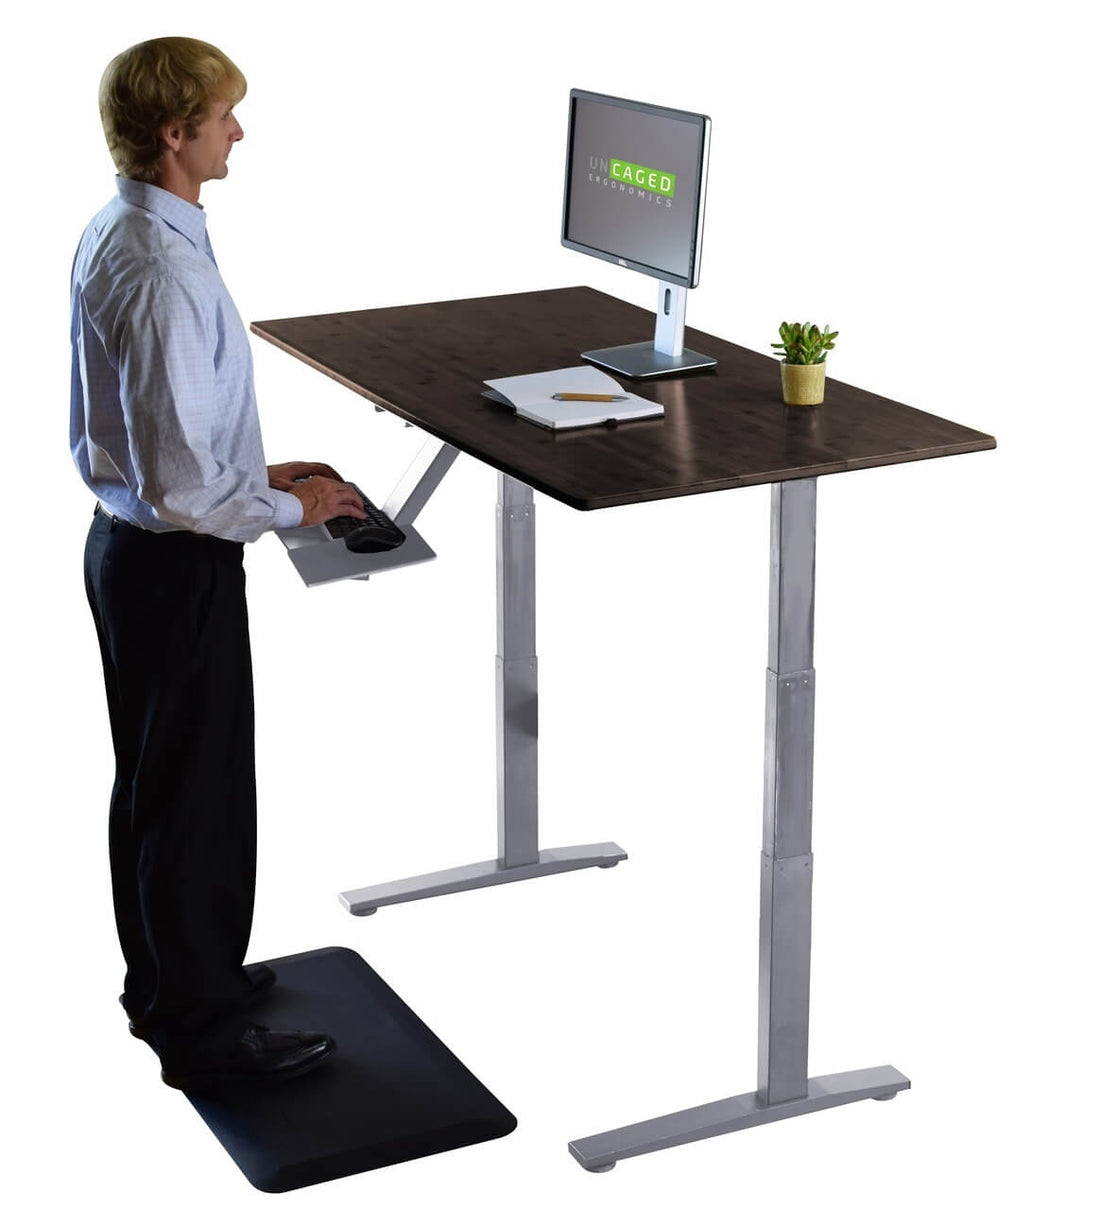 All About the Ergonomic Office Furniture Craze